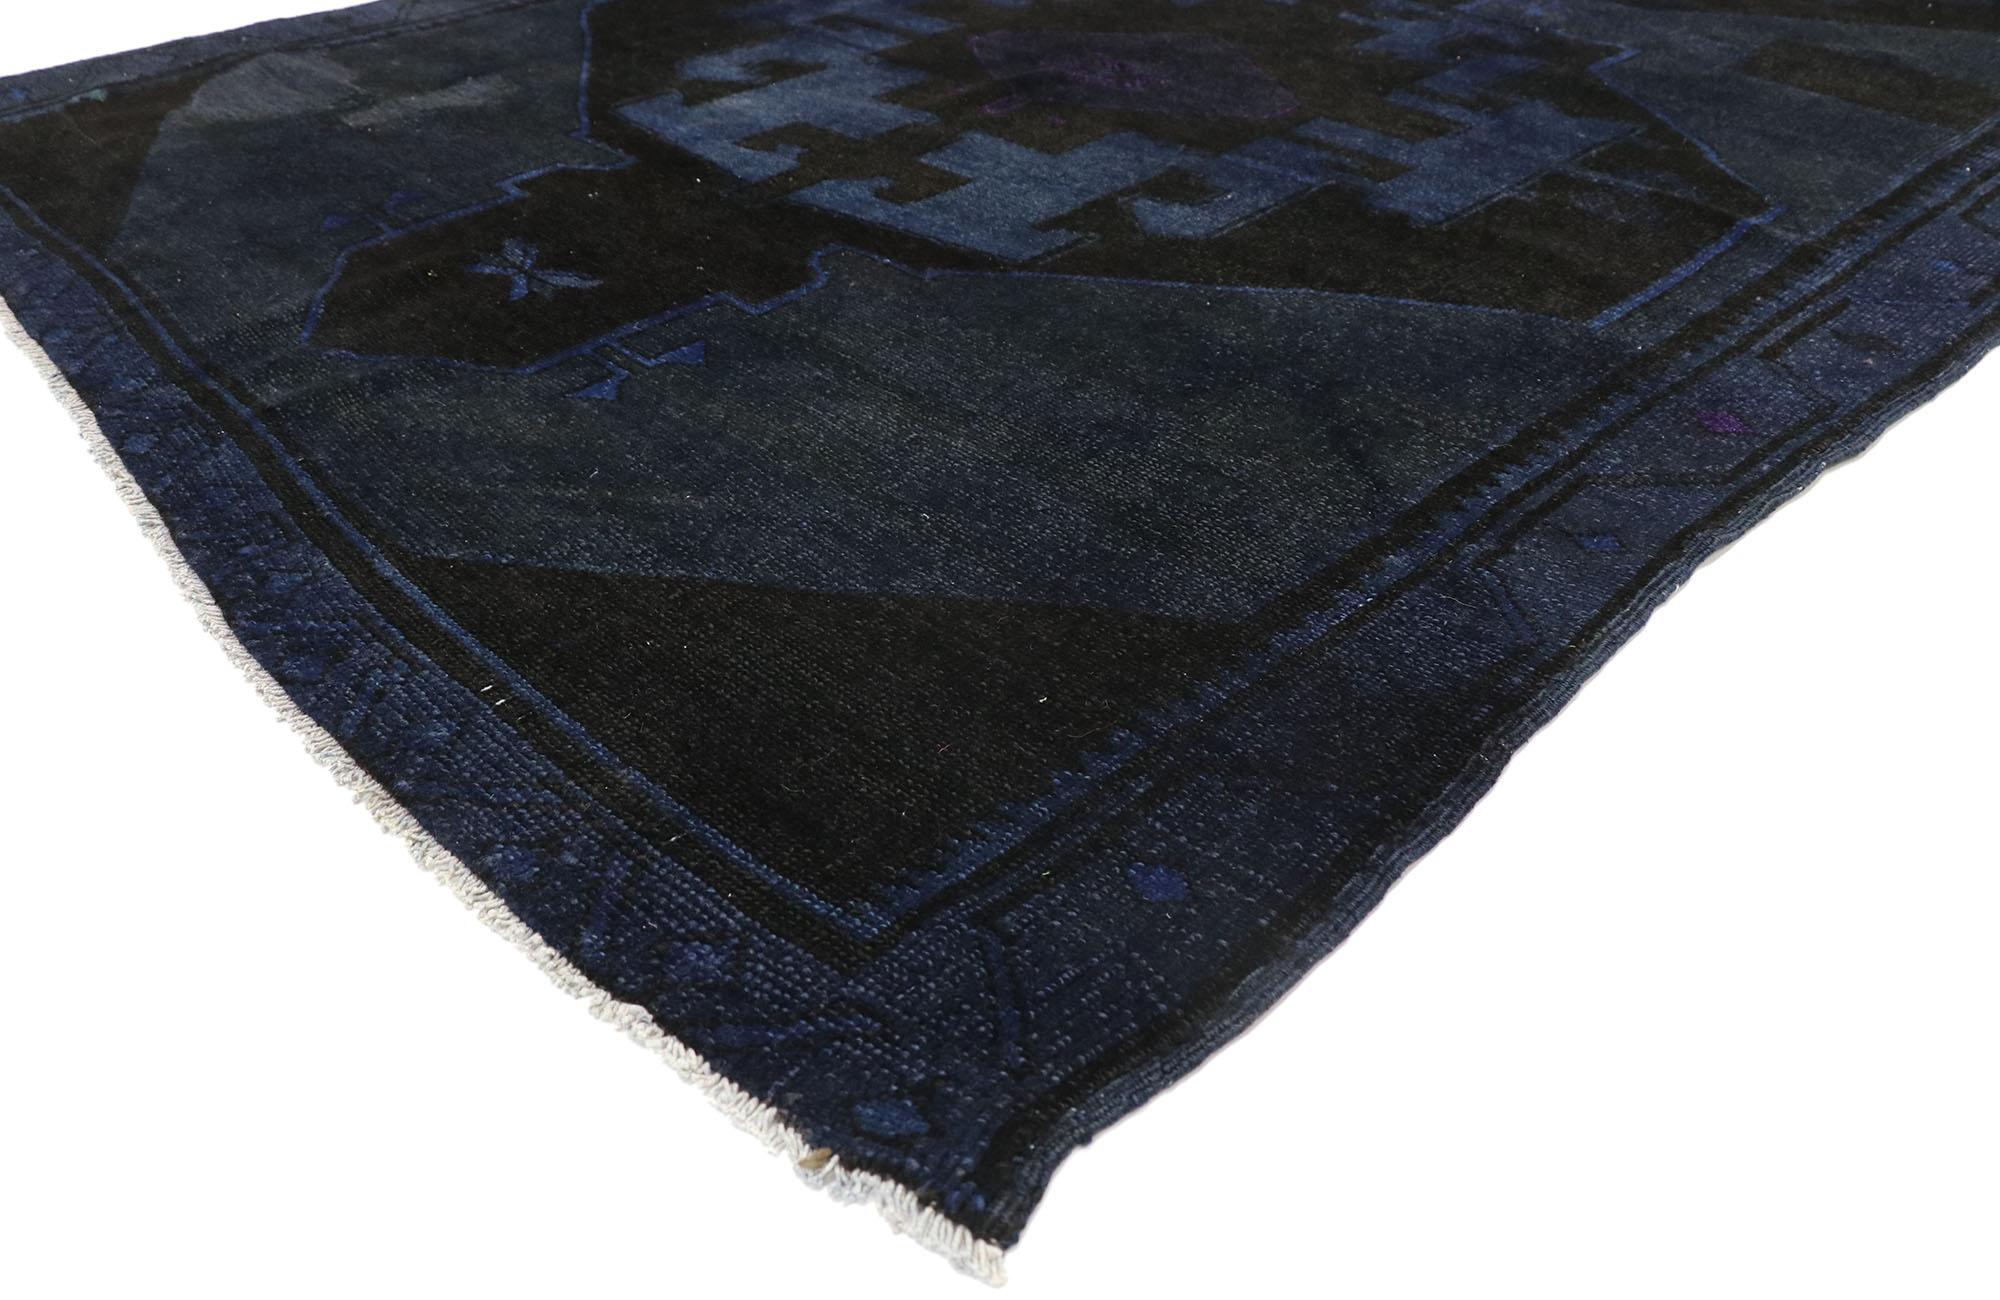 52841 vintage Turkish Overdyed Gallery rug with Modern Luxe Sultry style. With a bold geometric pattern and striking appeal, this hand knotted wool vintage Turkish overdyed gallery rug can beautifully blend contemporary, modern, and traditional